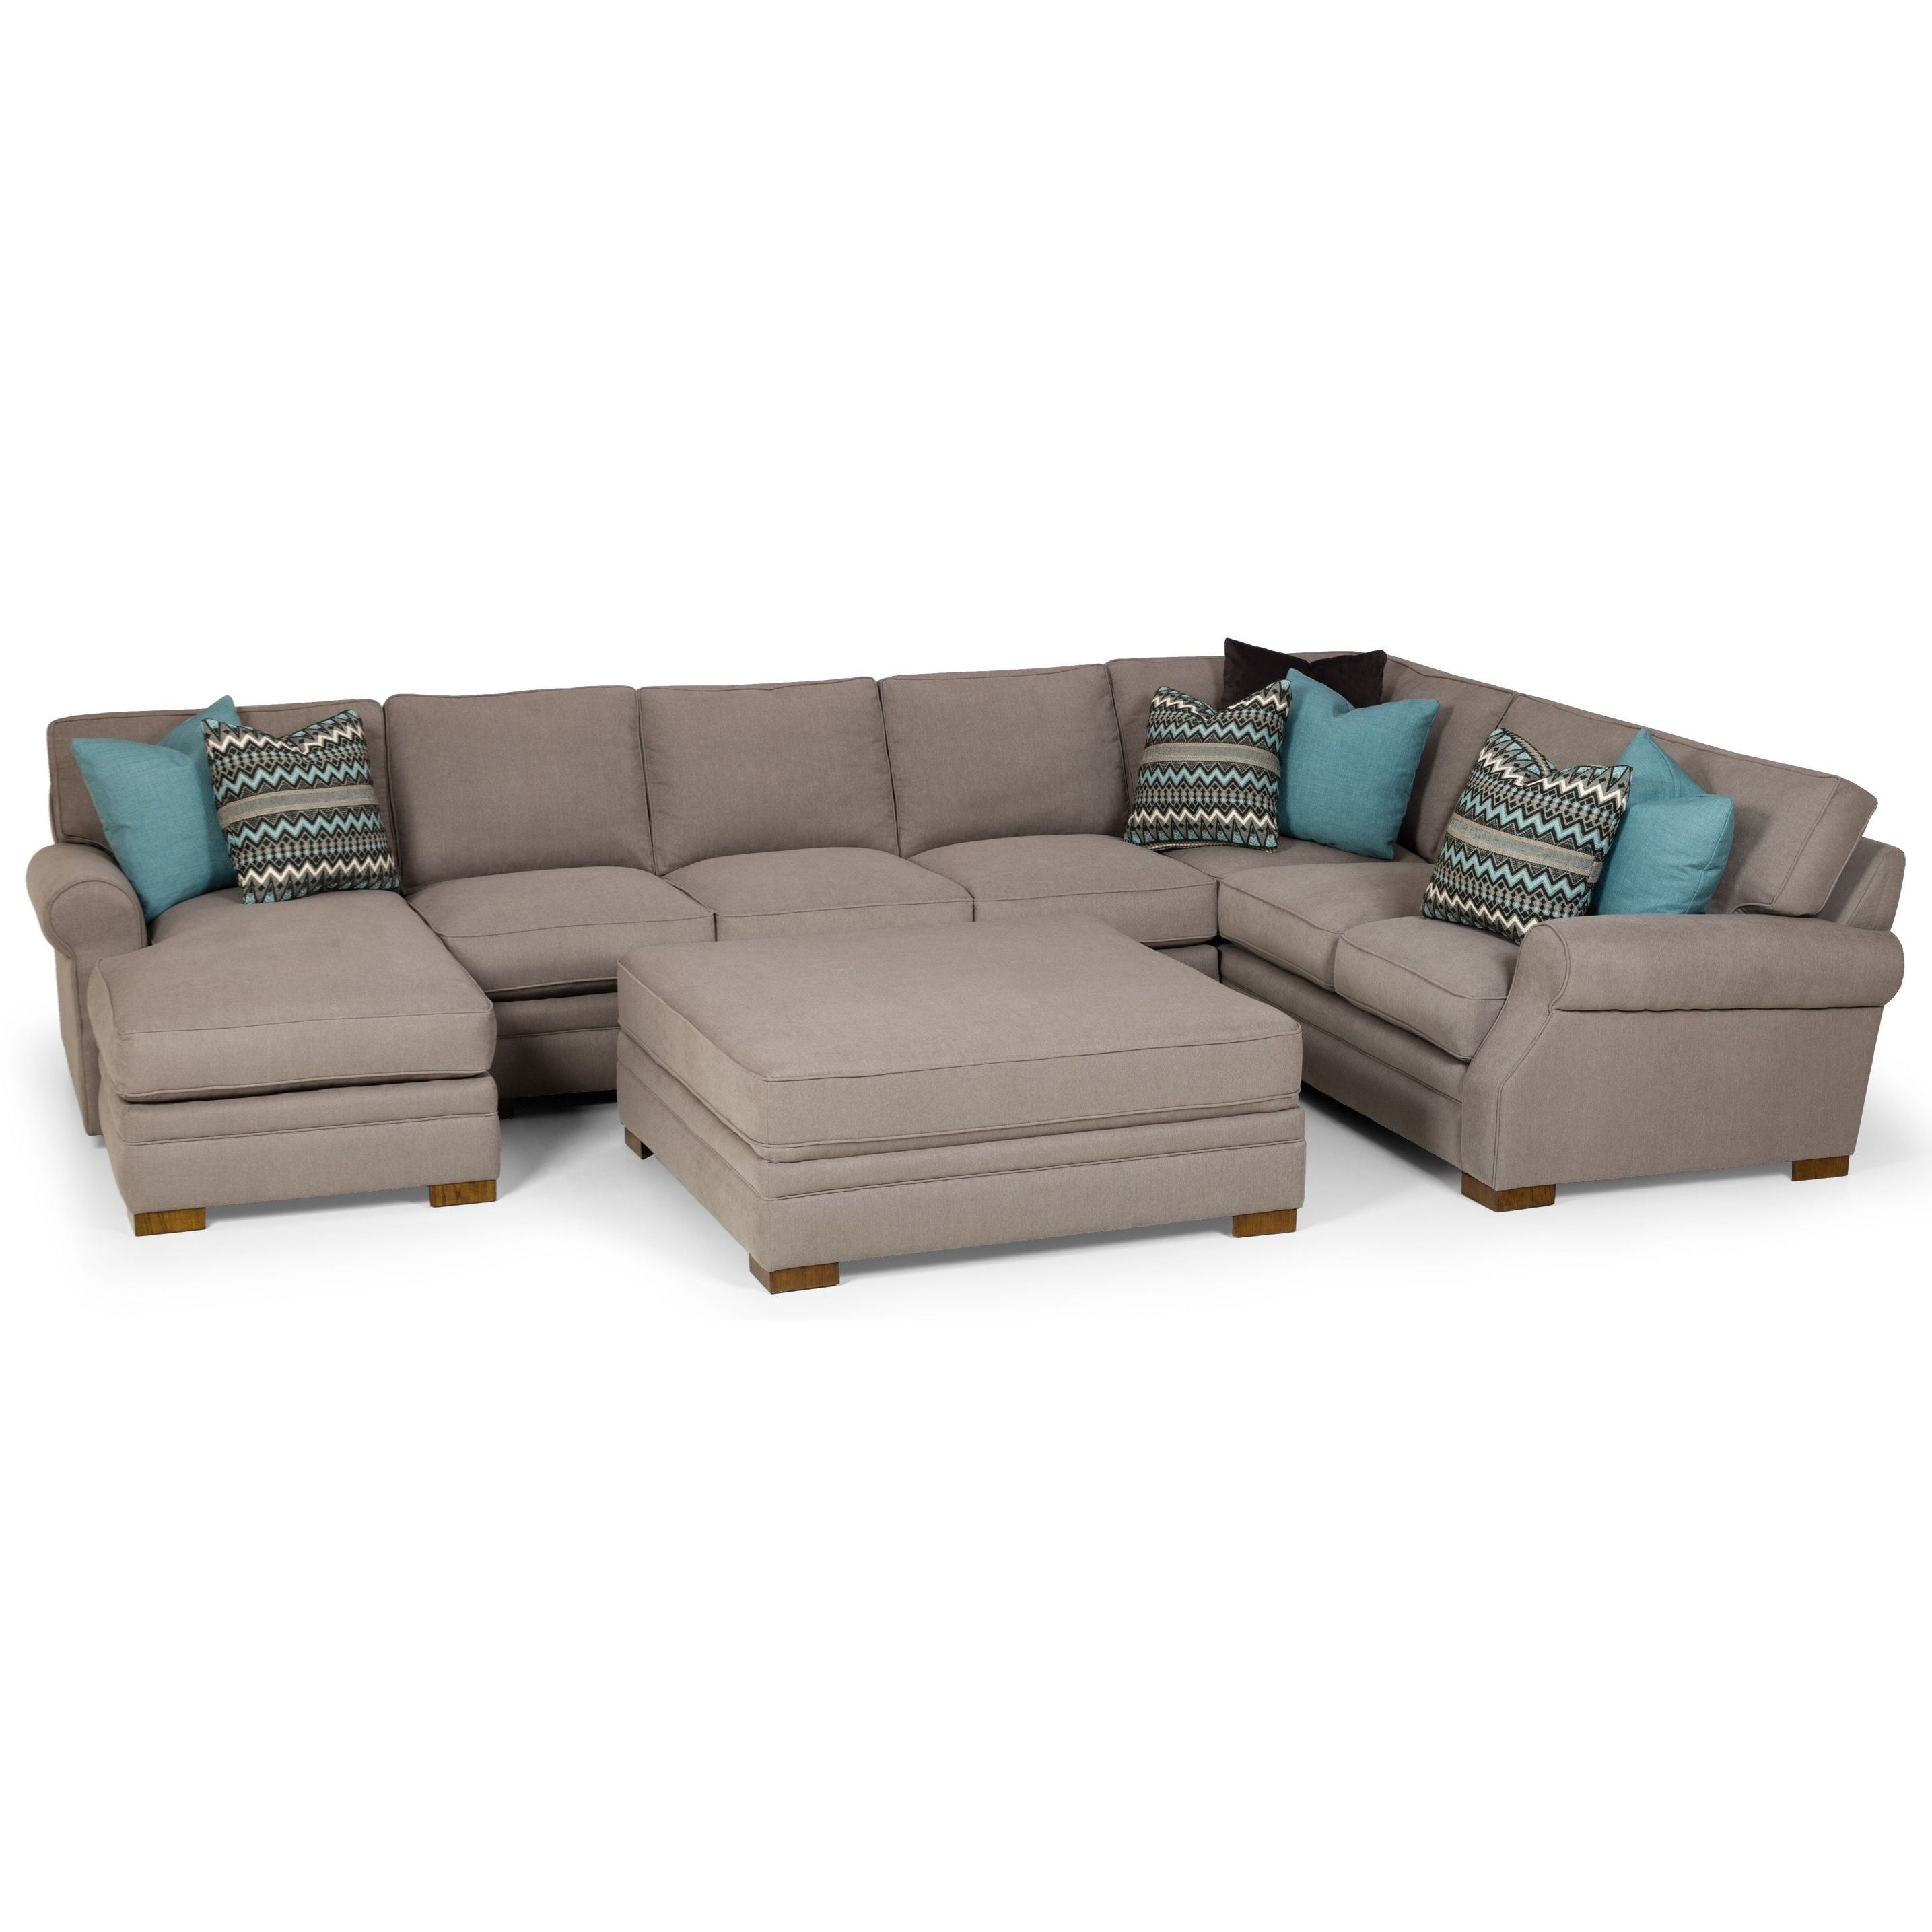 Sunset Home 525 6 Seat U Shape Sectional Sofa With Raf Chaise | Sadler's  Home Furnishings | Sectional Sofas In 6 Seater Sectional Couches (View 8 of 20)